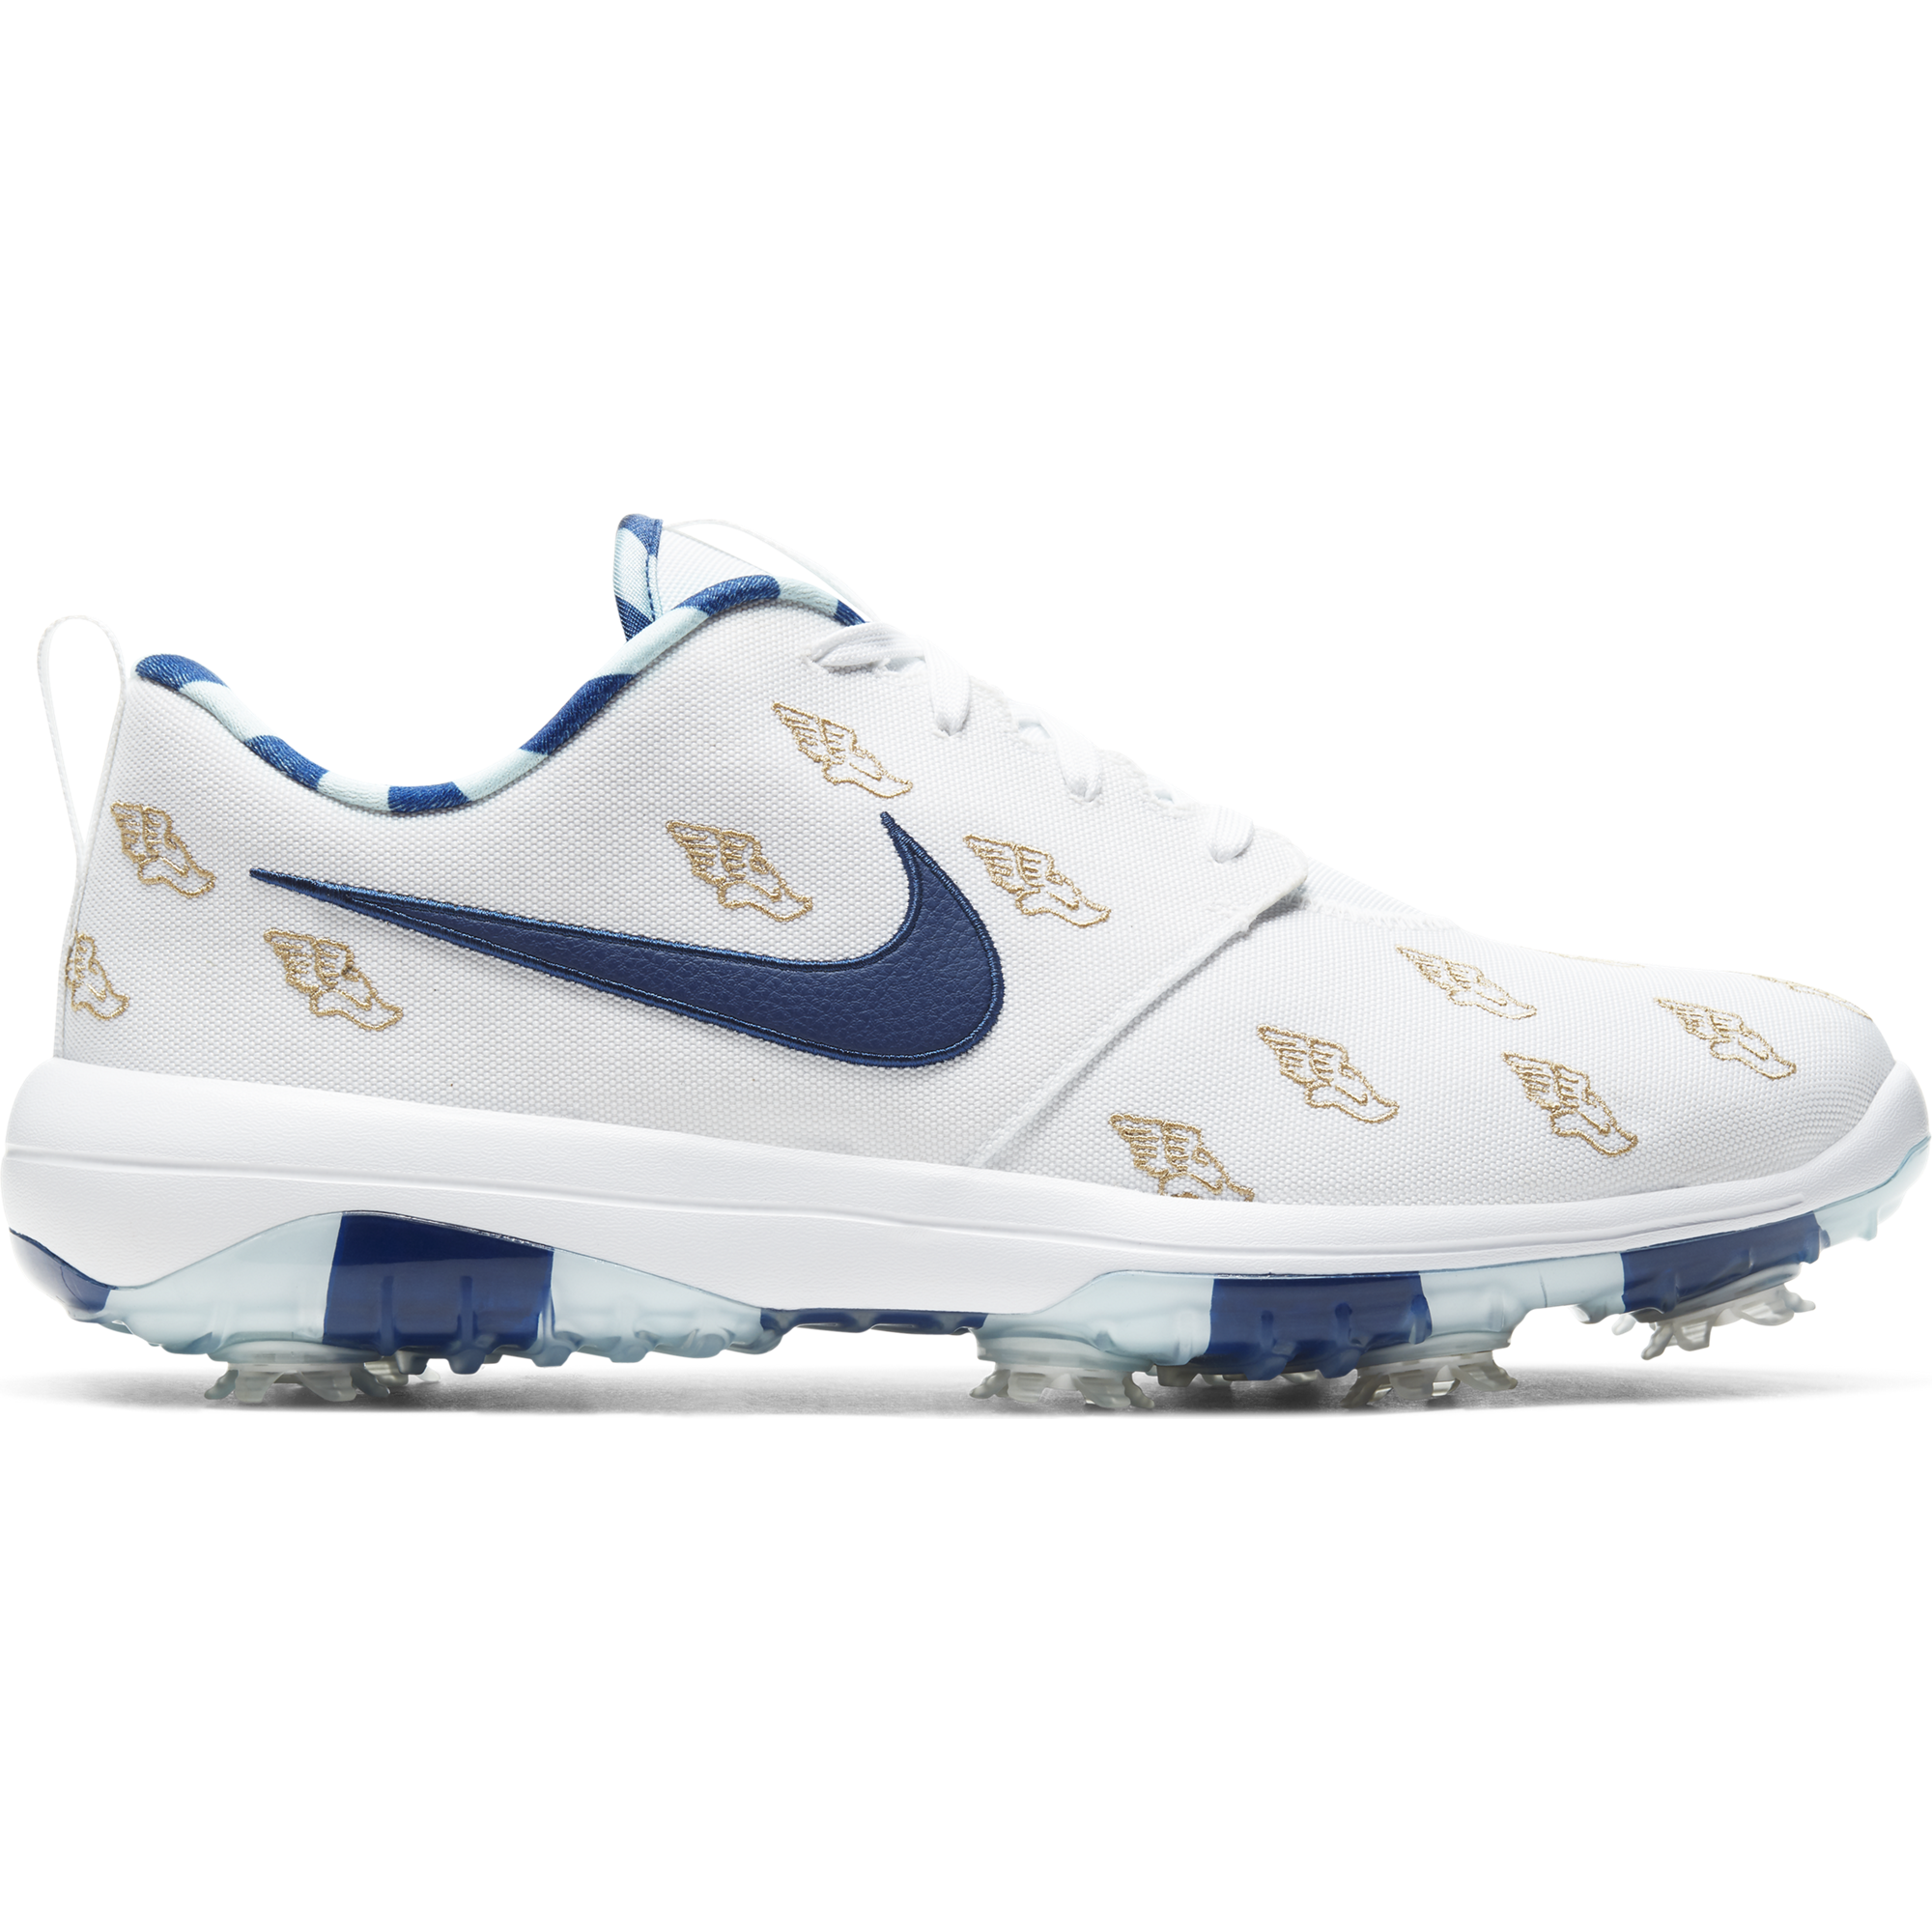 us open nike golf shoes